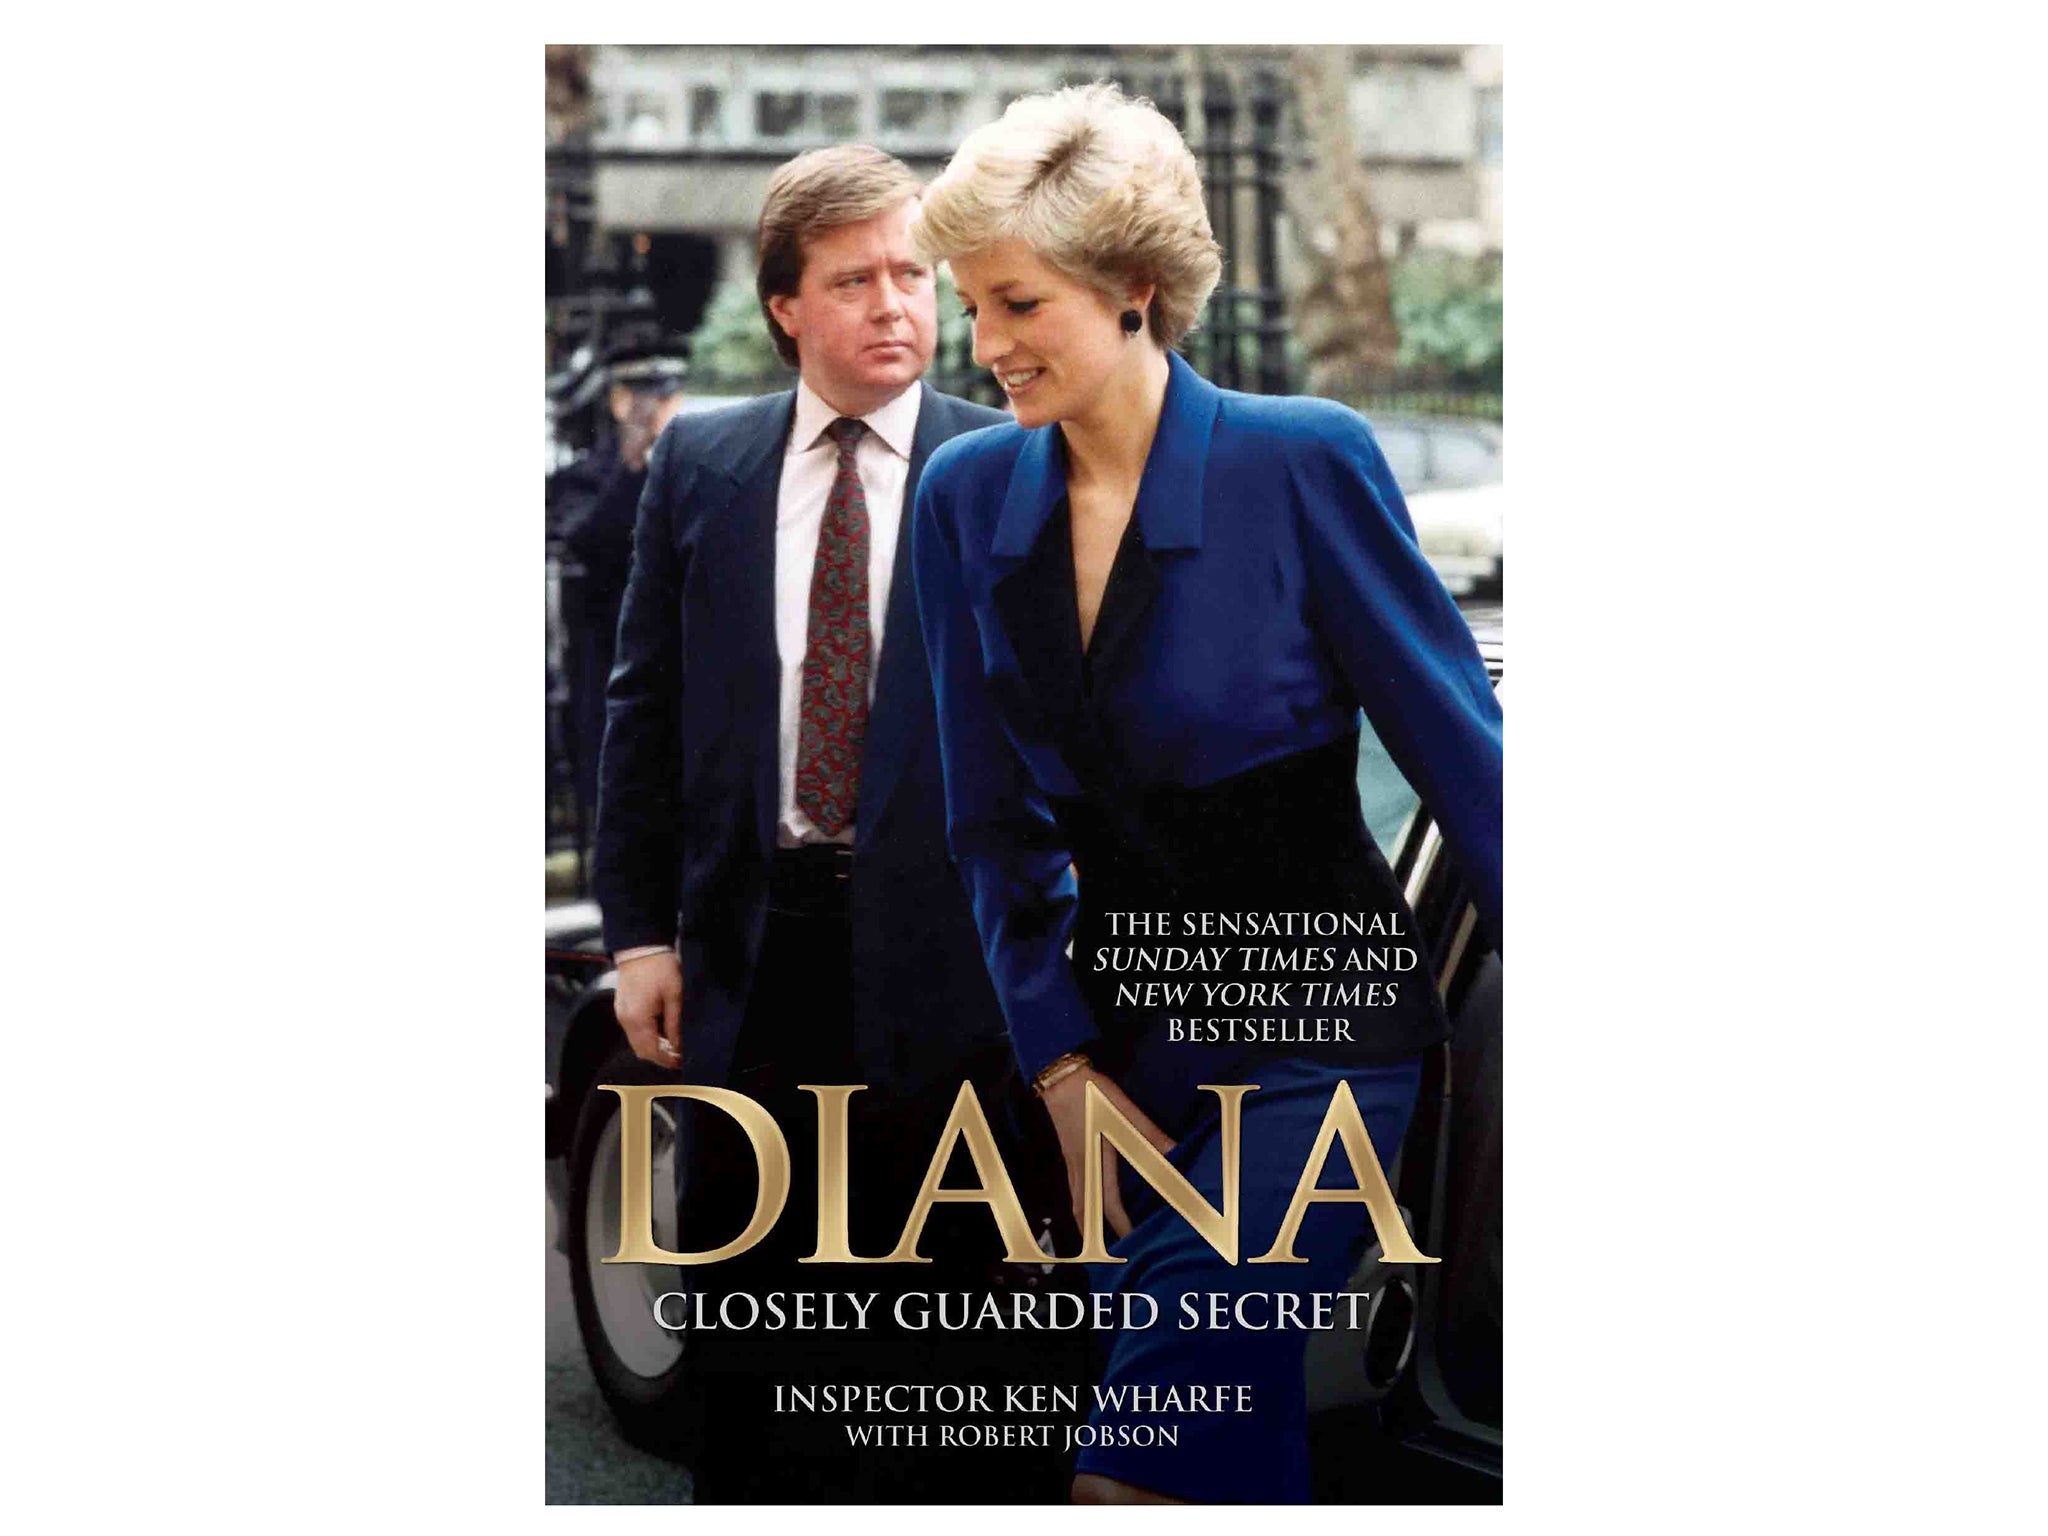 diana-closely-guarded-secret-indybest.jpg